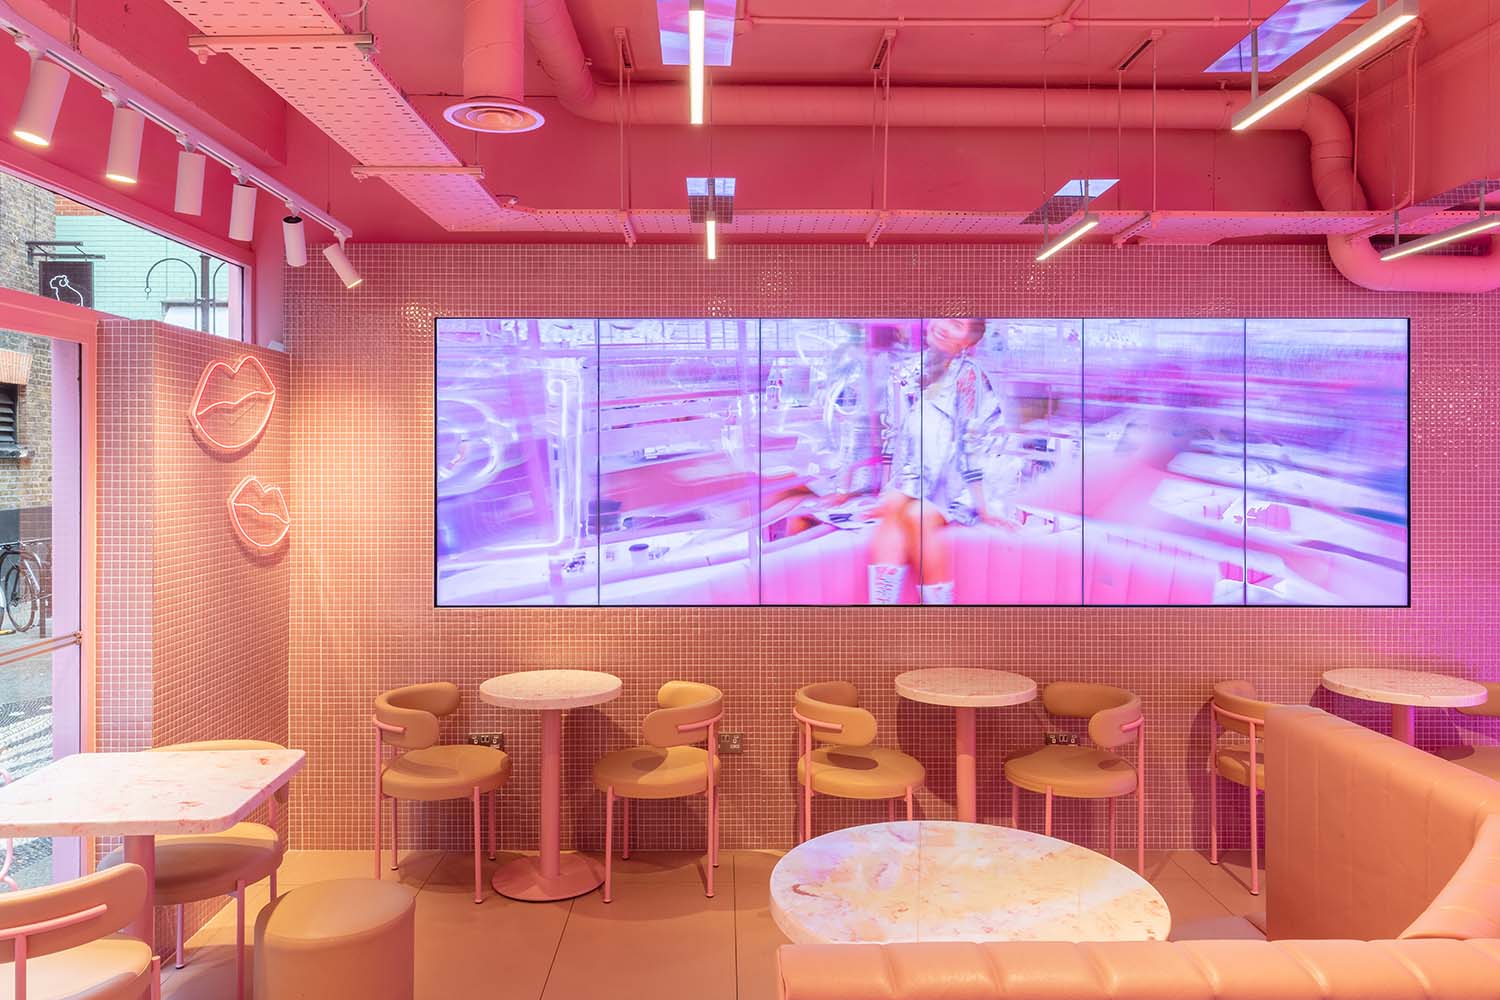 A Bolt Of Brightness And Candy Pink Has Arrived In Soho In Wardour Street As "London's Most Instagrammable Hotspot"